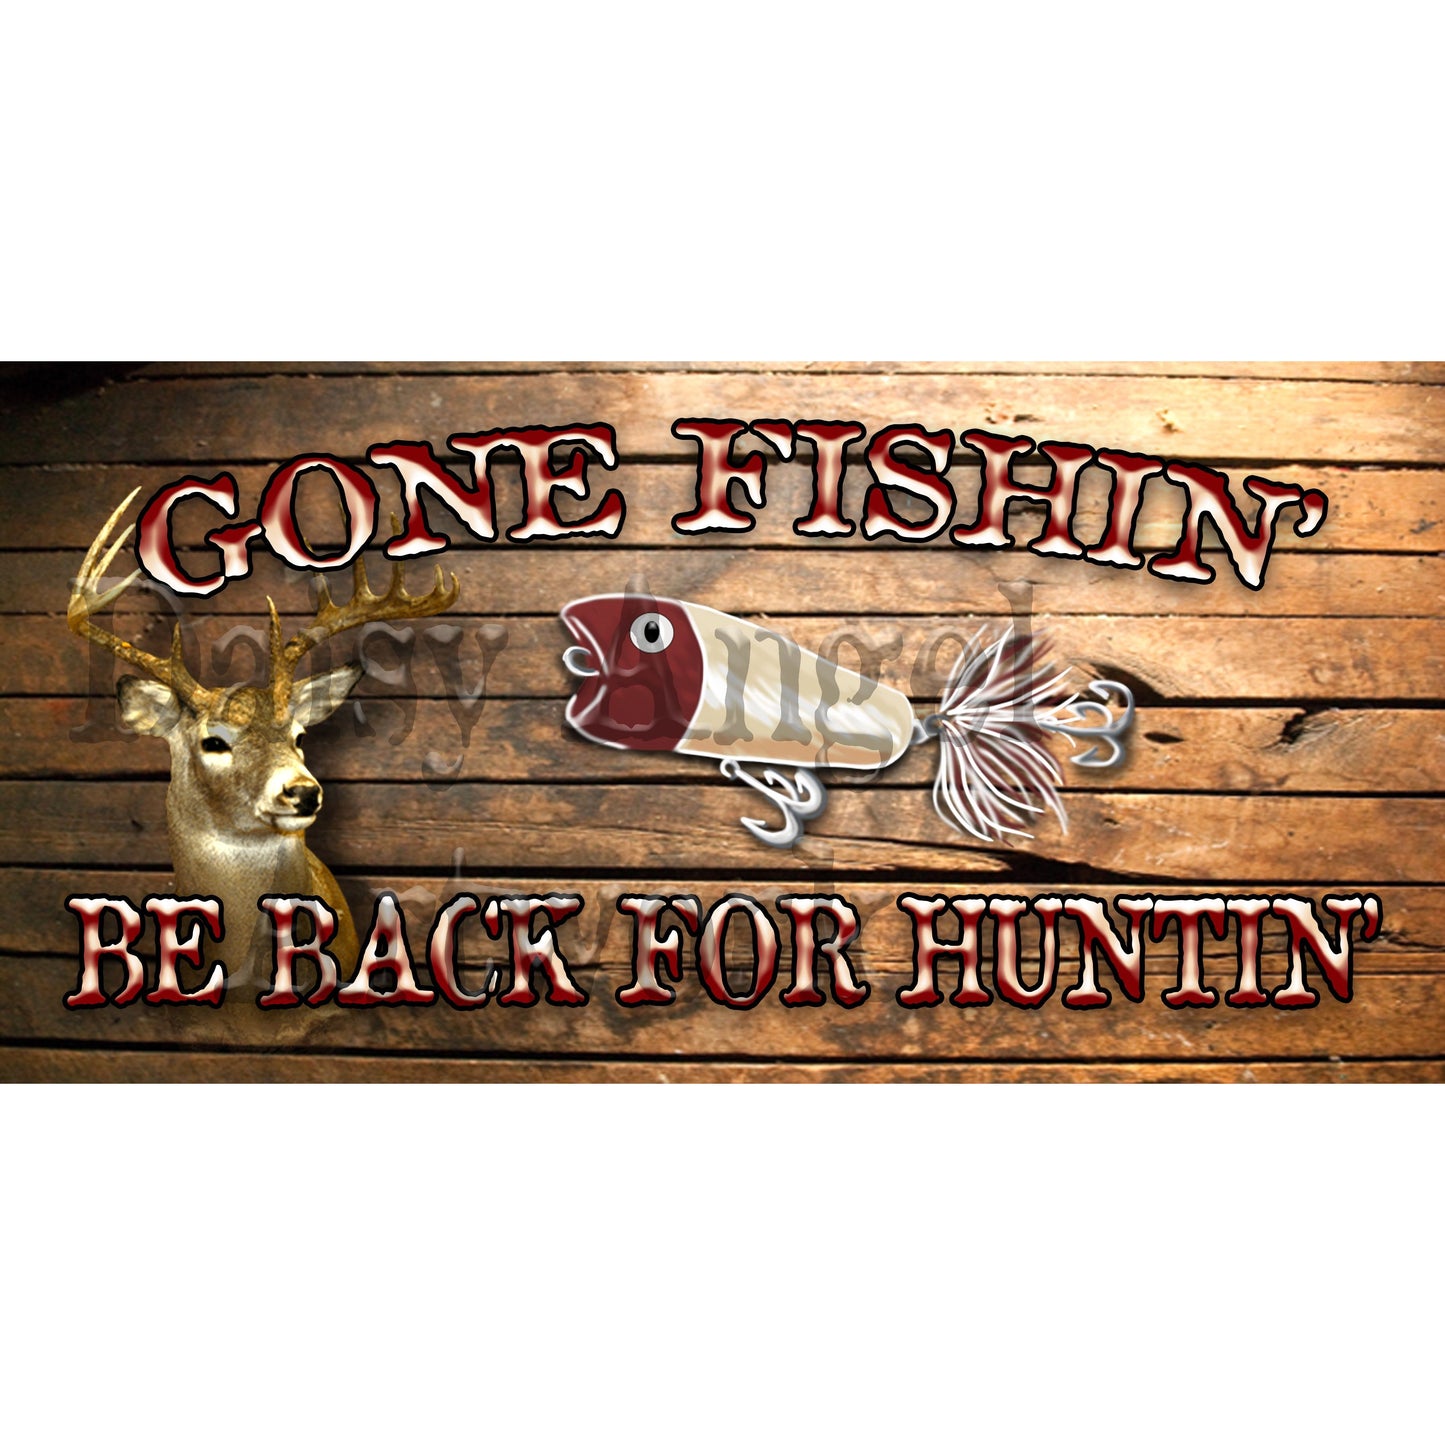 License Plate-Gone Fishing be Back For Hunting